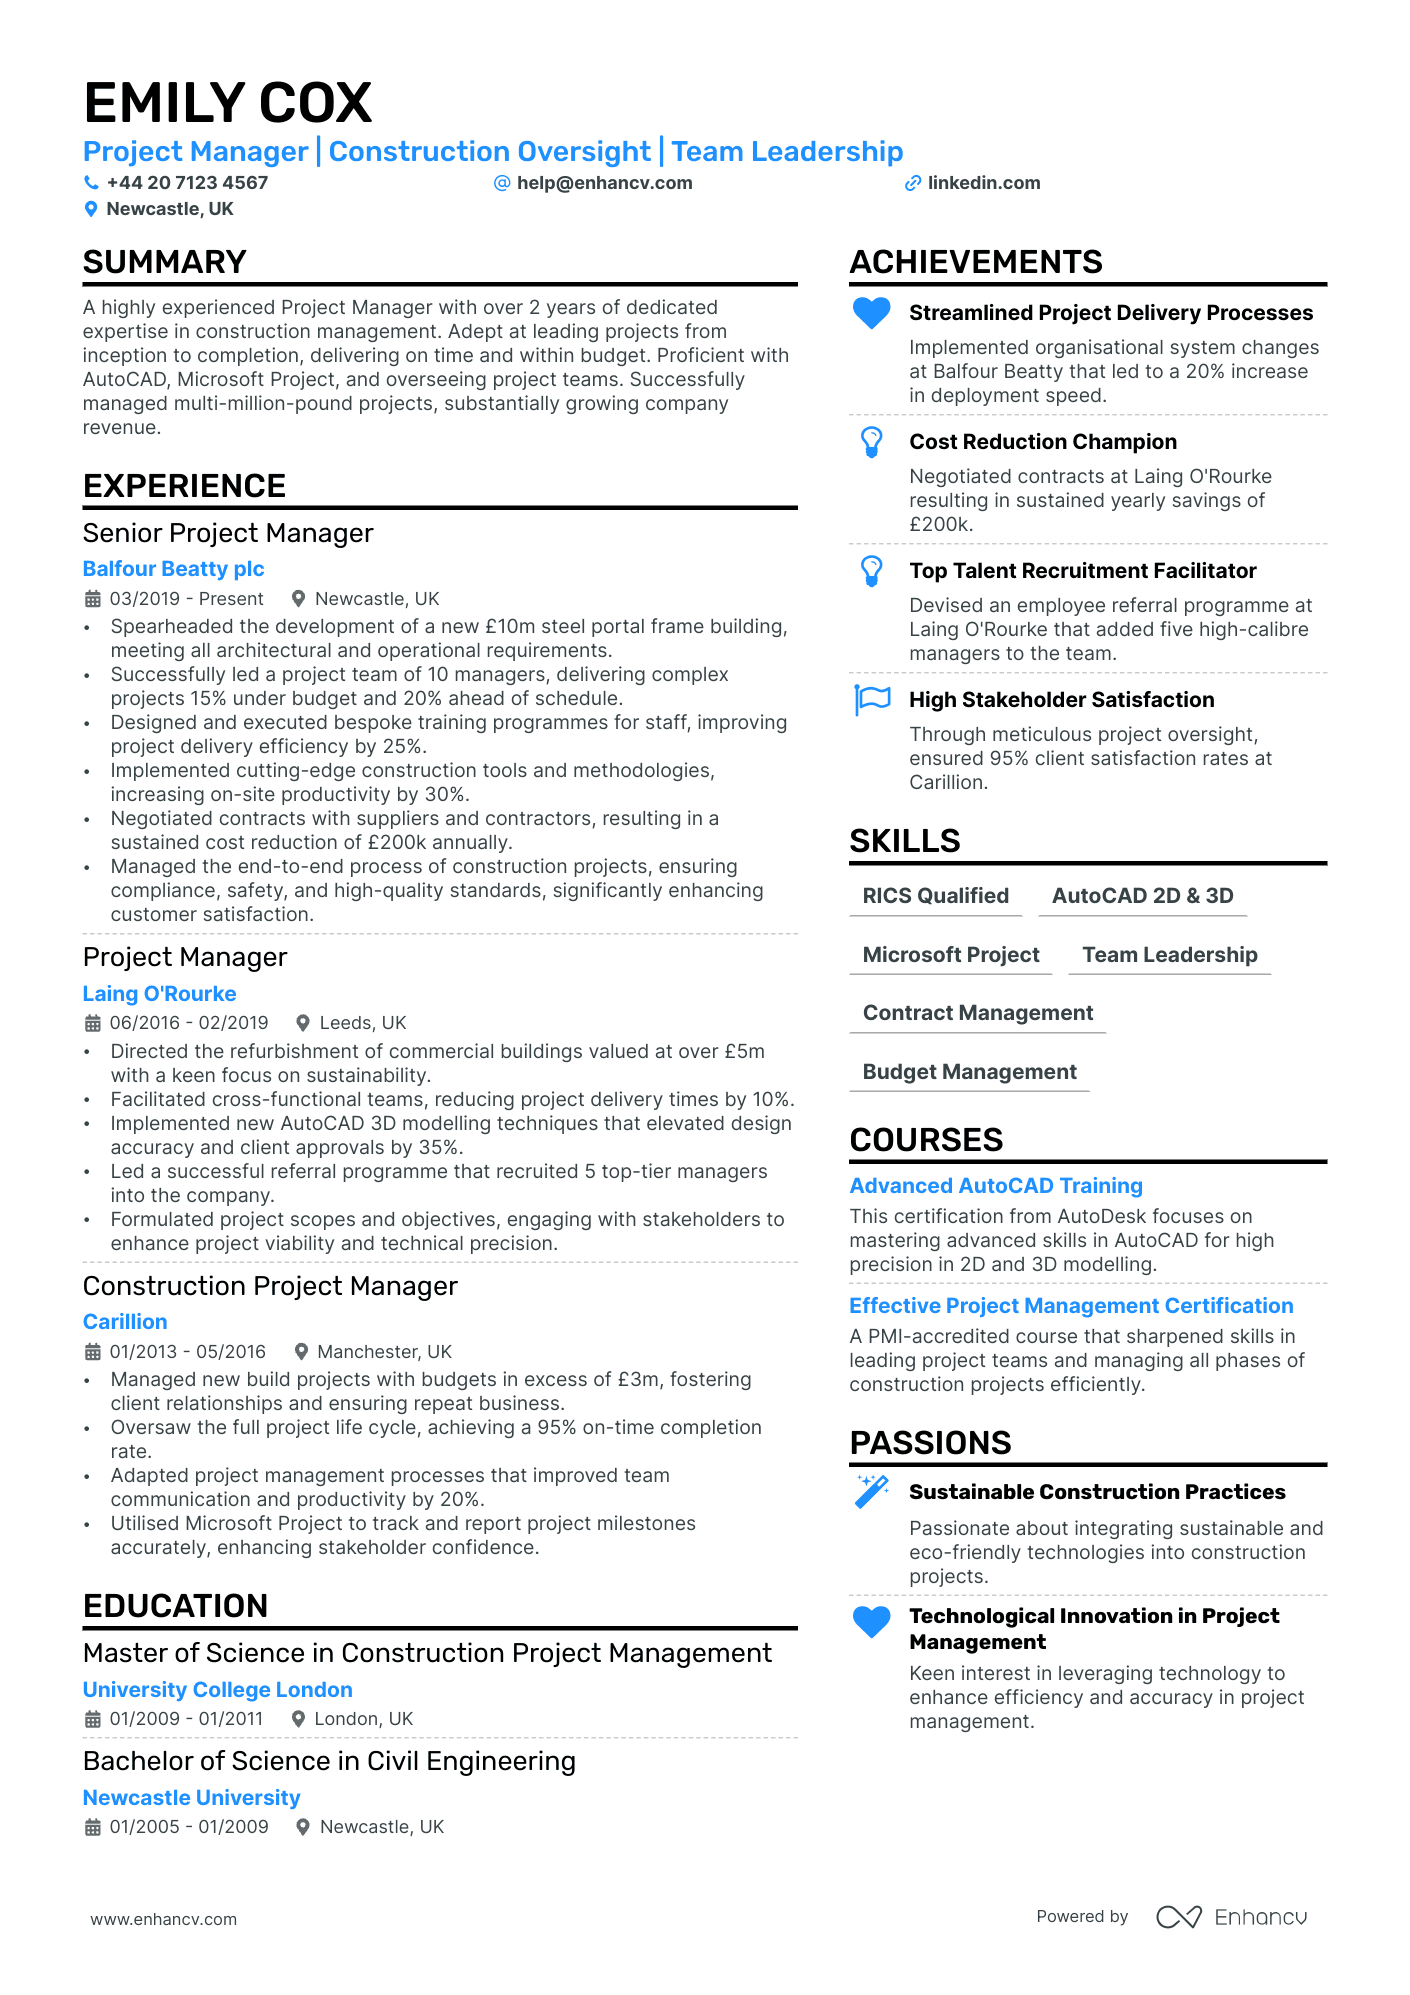 senior project manager resume example